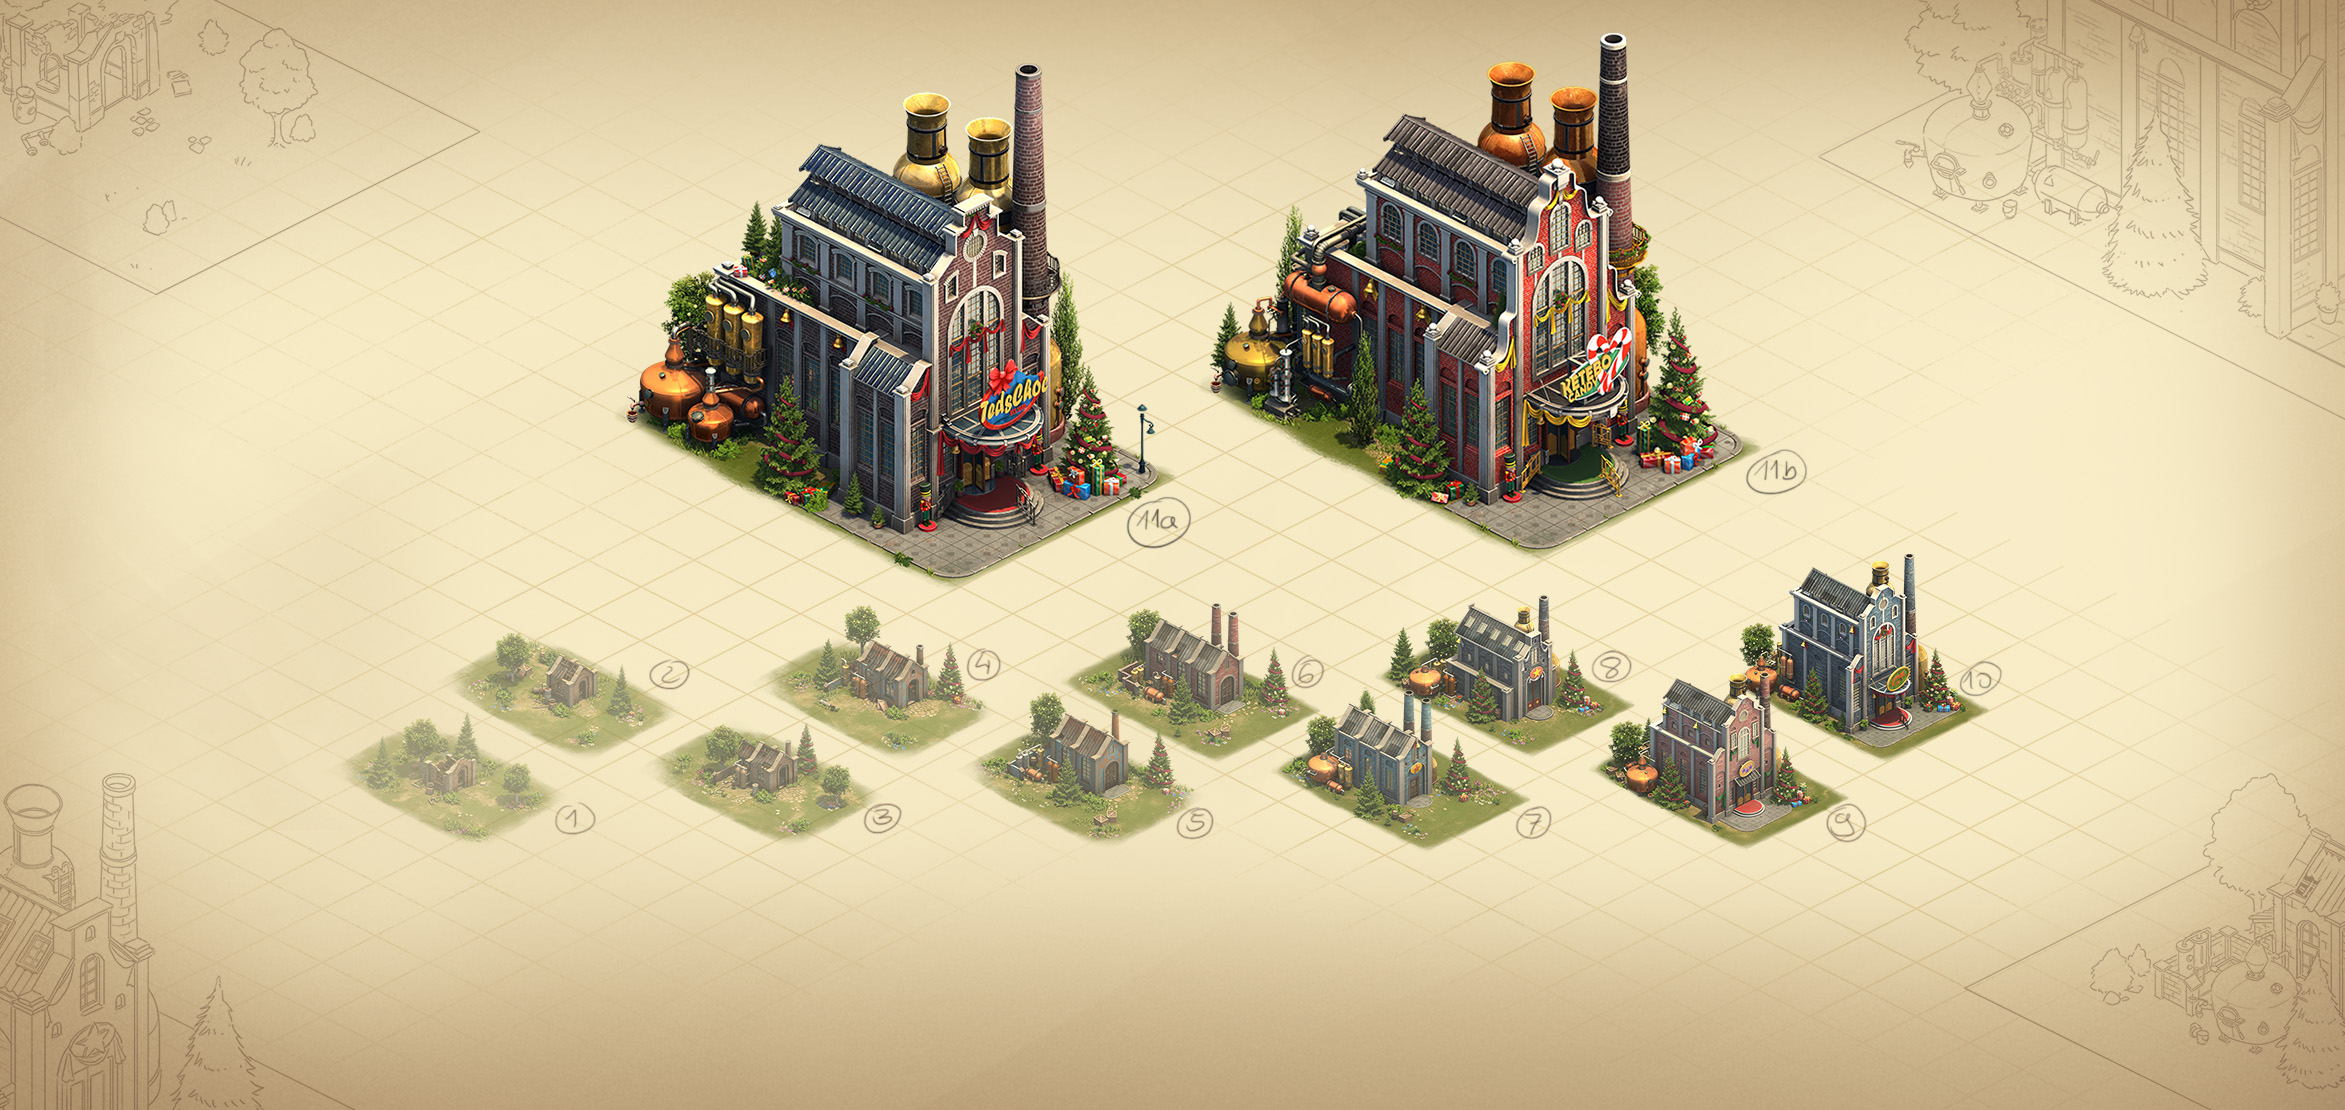 beta forge of empires